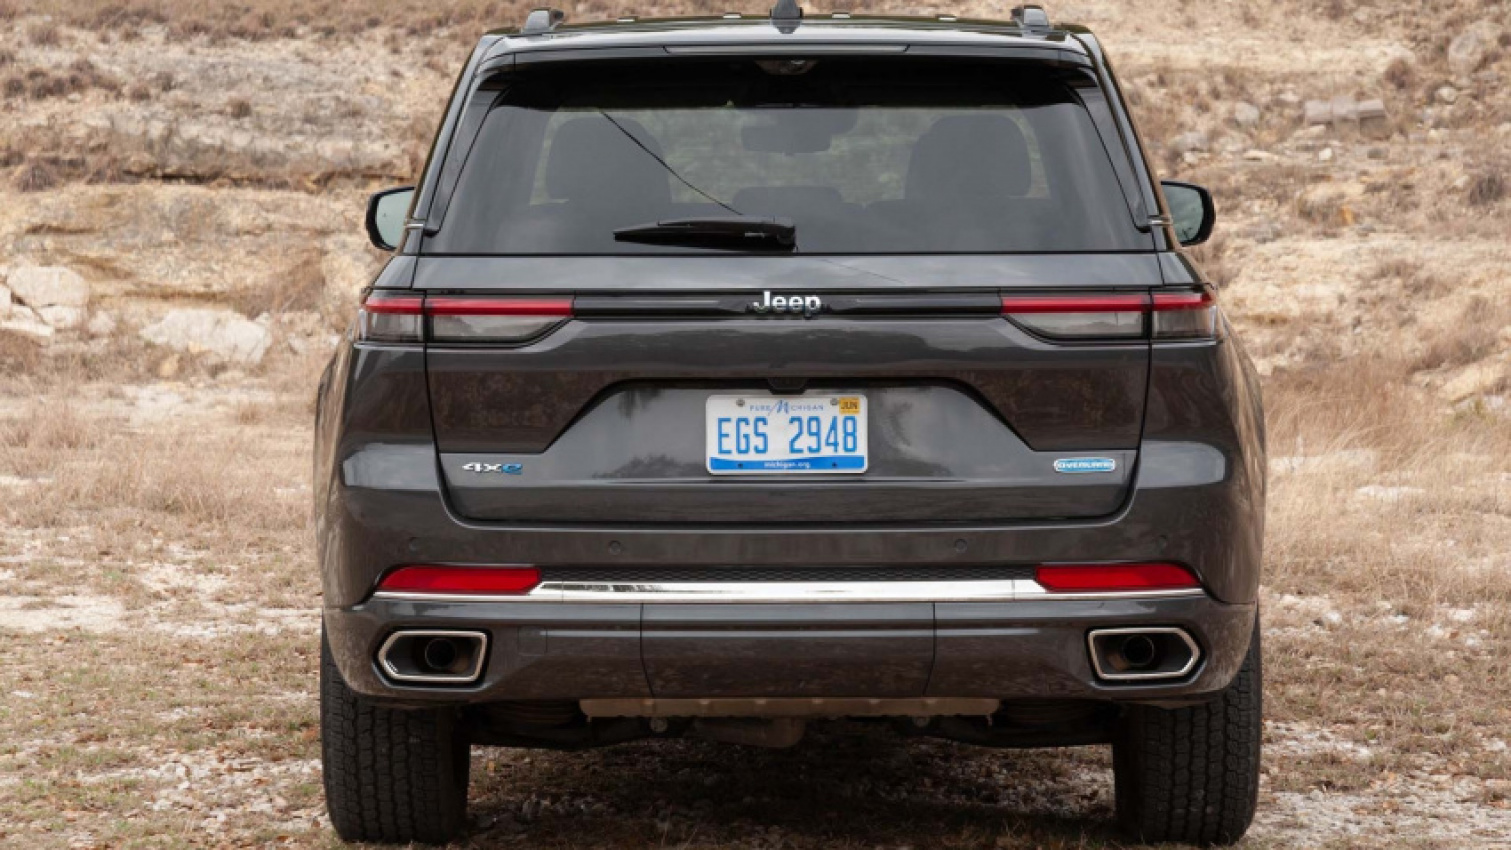 cars, hybrid cars, jeep, first drives, hybrids, jeep grand cherokee, jeep grand cherokee news, jeep news, plug-in hybrids, first drive review: 2022 jeep grand cherokee 4xe plugs into the luxury side of the brand with a lot of capability